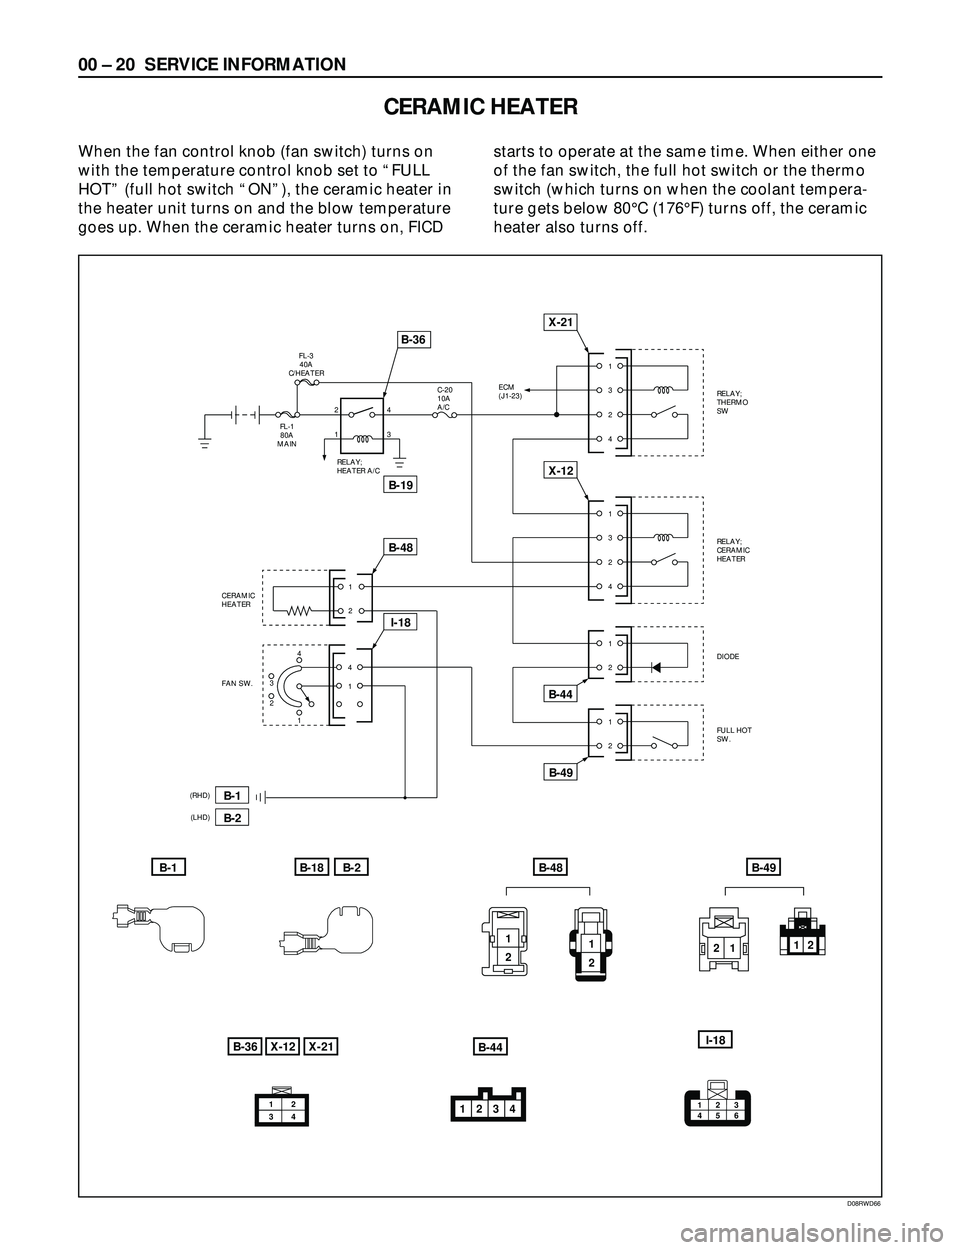 ISUZU TROOPER 1998  Service Workshop Manual 00 Ð 20 SERVICE INFORMATION
CERAMIC HEATER
When the fan control knob (fan switch) turns on
with the temperature control knob set to ÒFULL
HOTÓ (full hot switch ÒONÓ), the ceramic heater in
the he